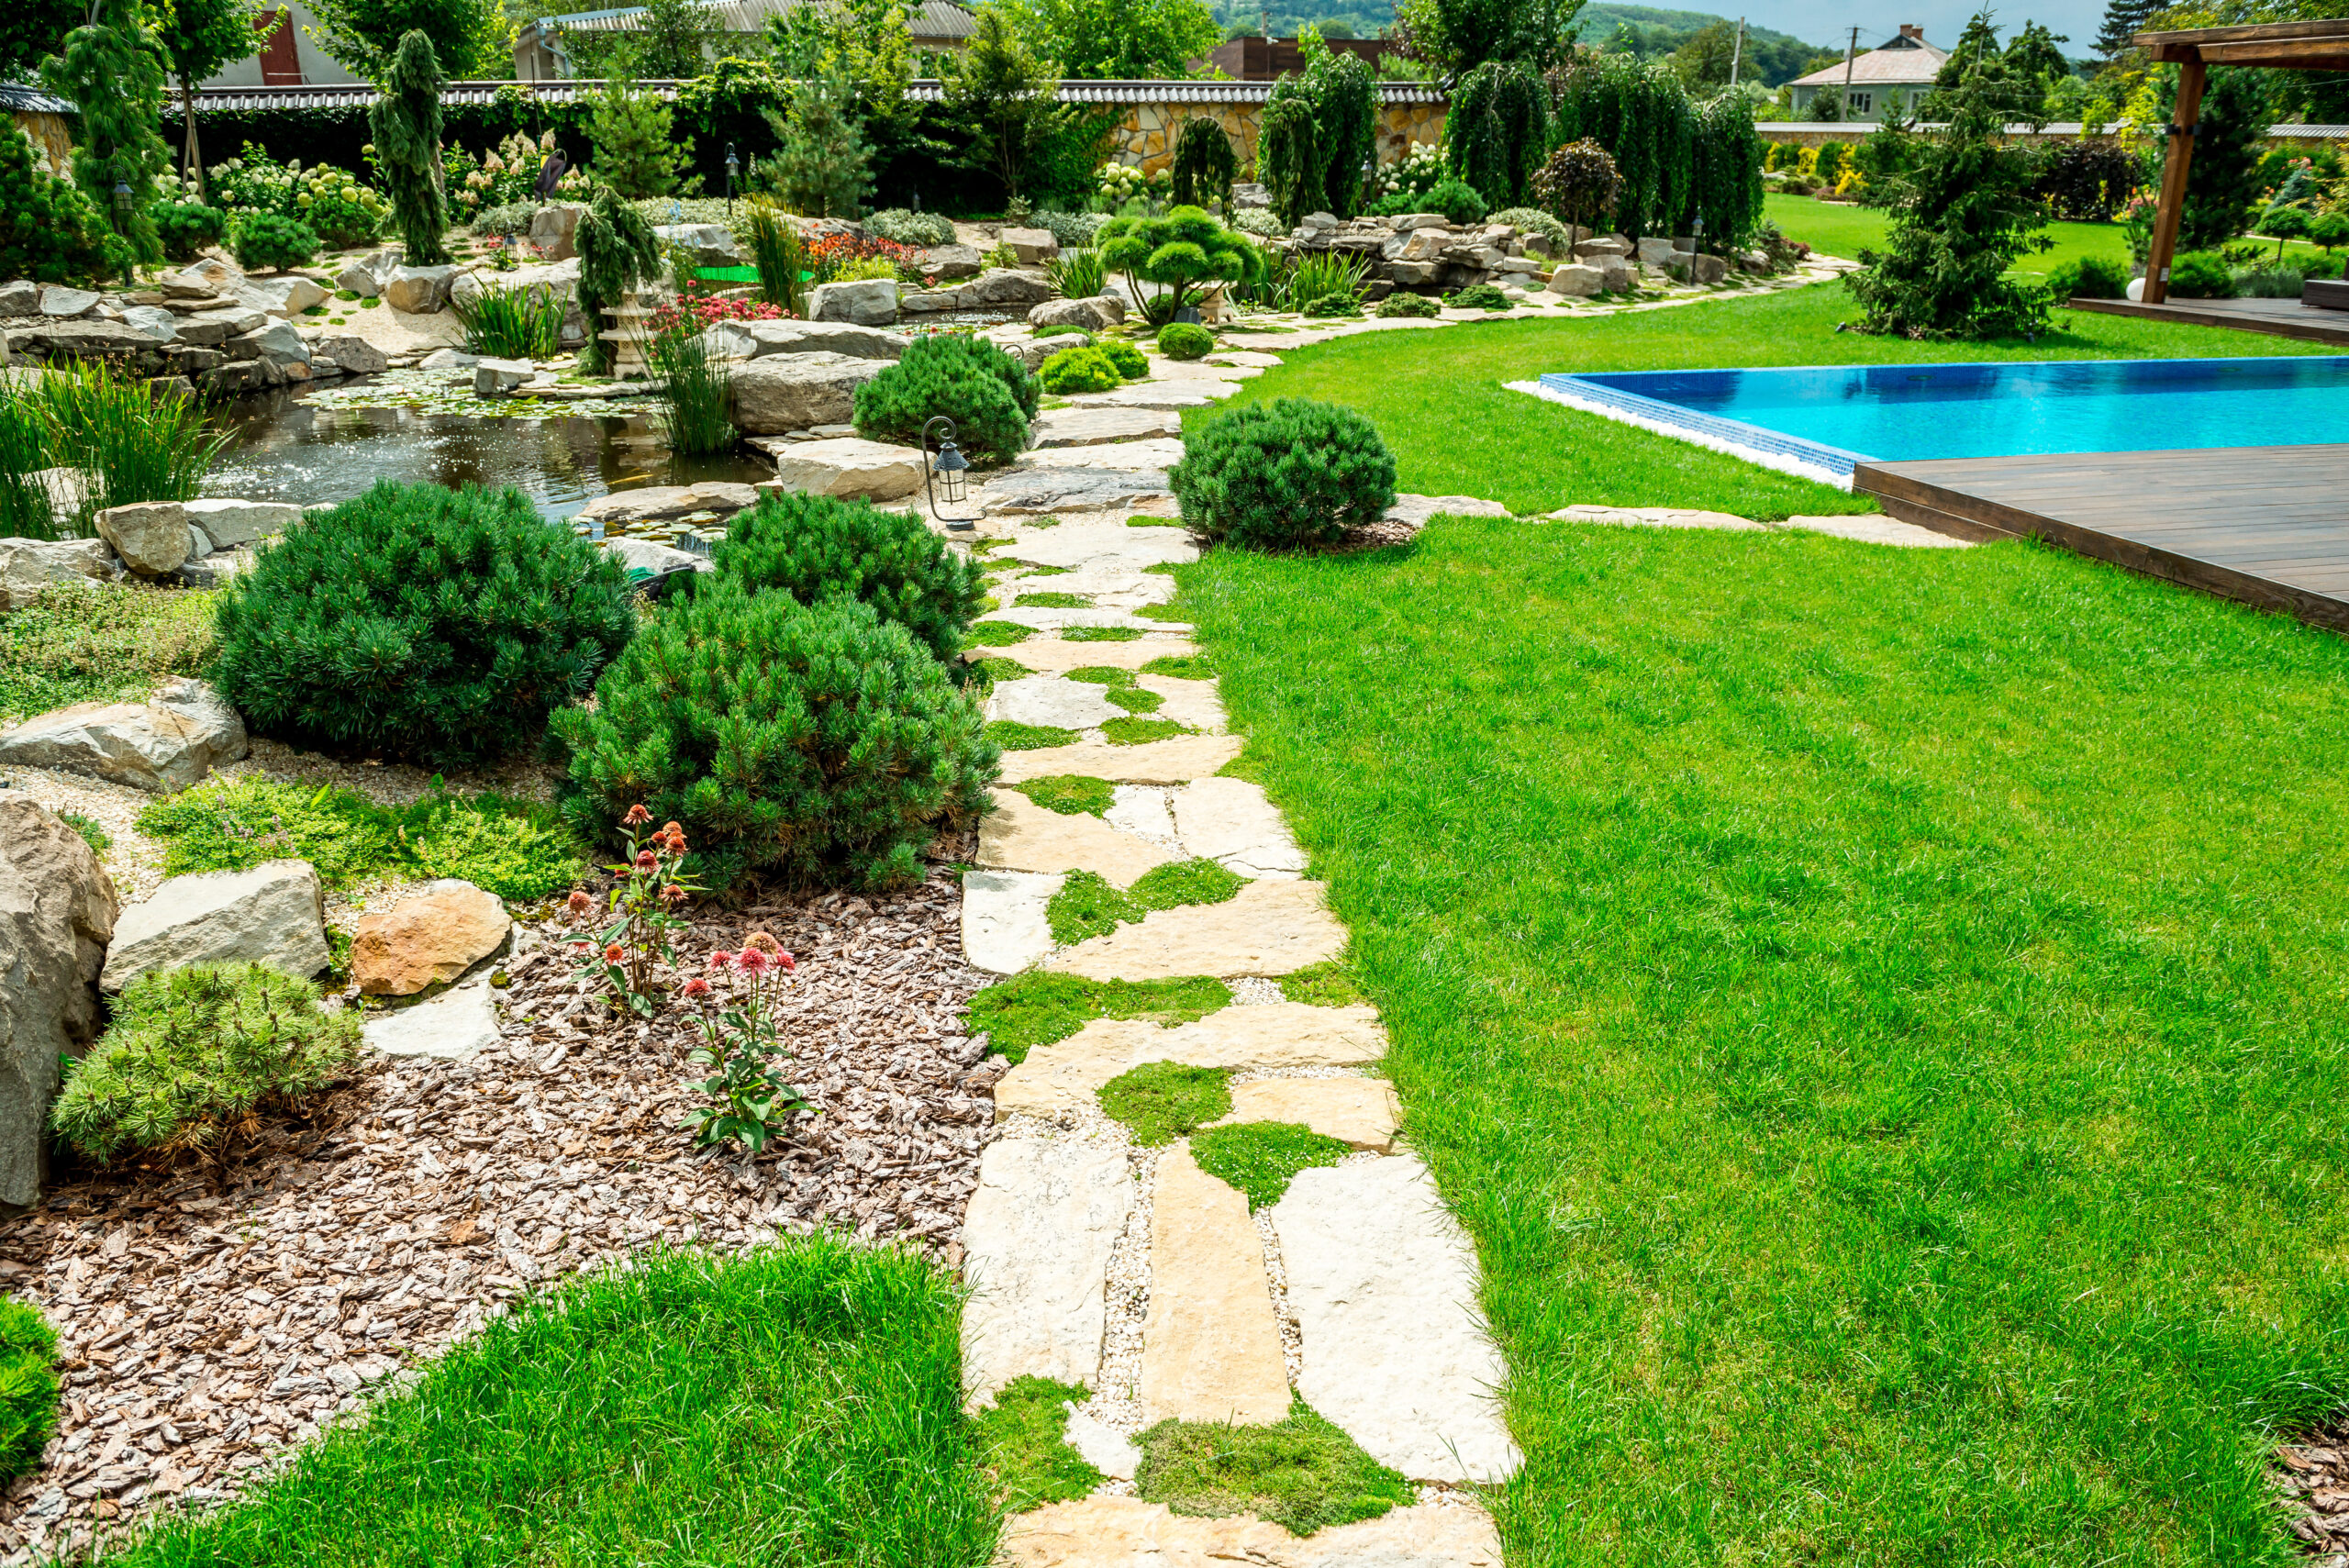 A country house with a beautiful courtyard behind the house and a swimming pool, landscape design